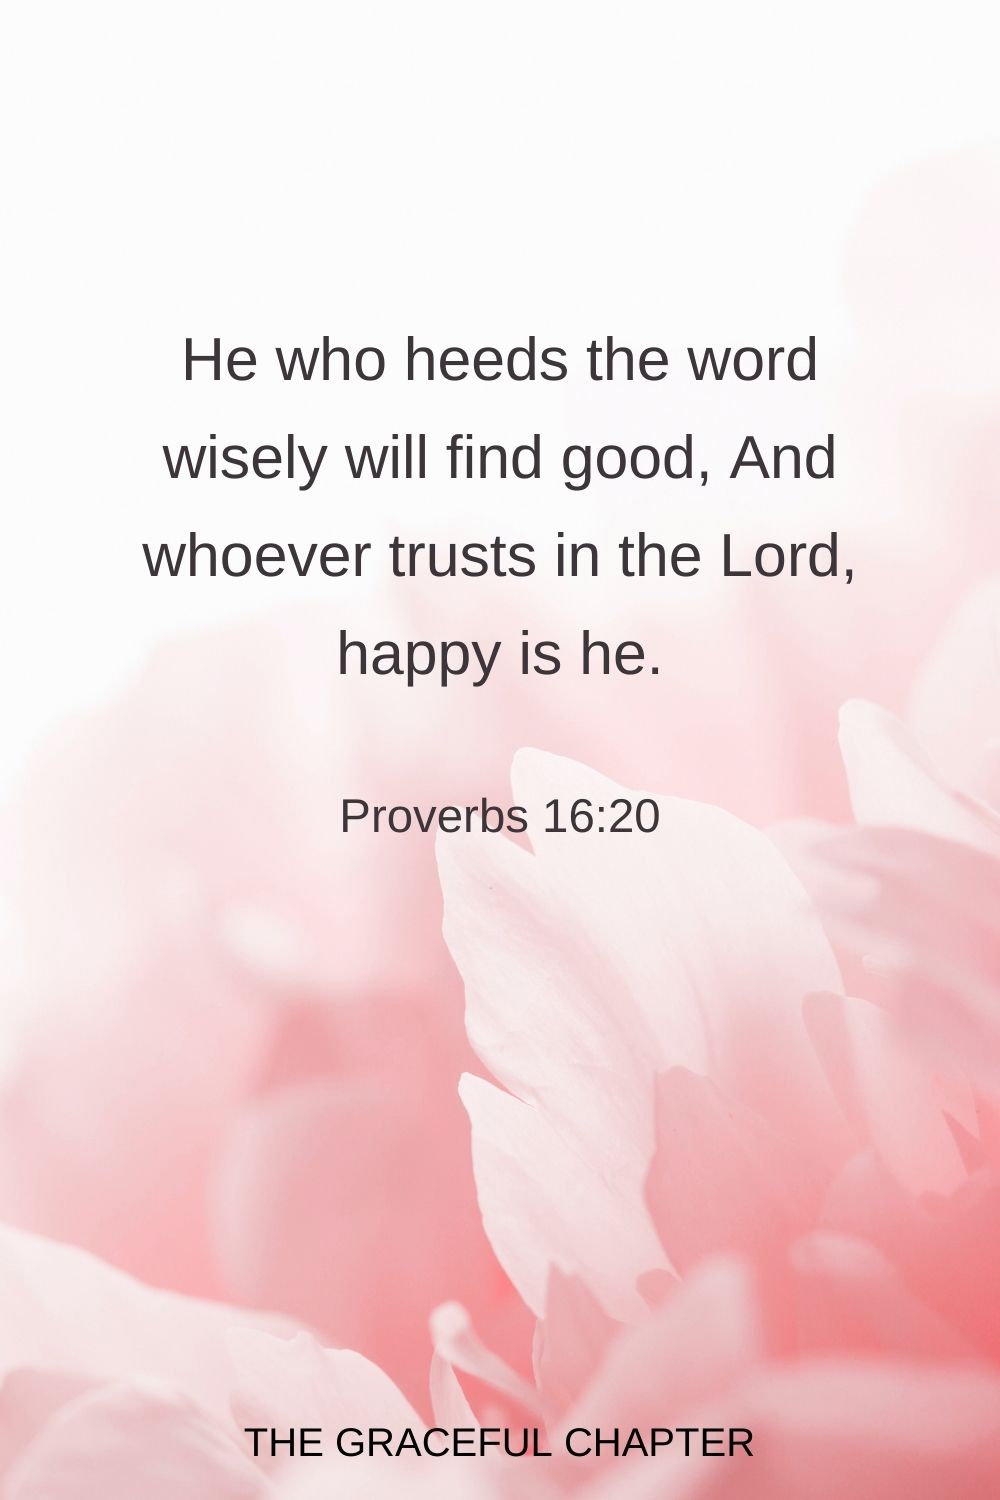 He who heeds the word wisely will find good, And whoever trusts in the Lord, happy is he. Proverbs 16:20